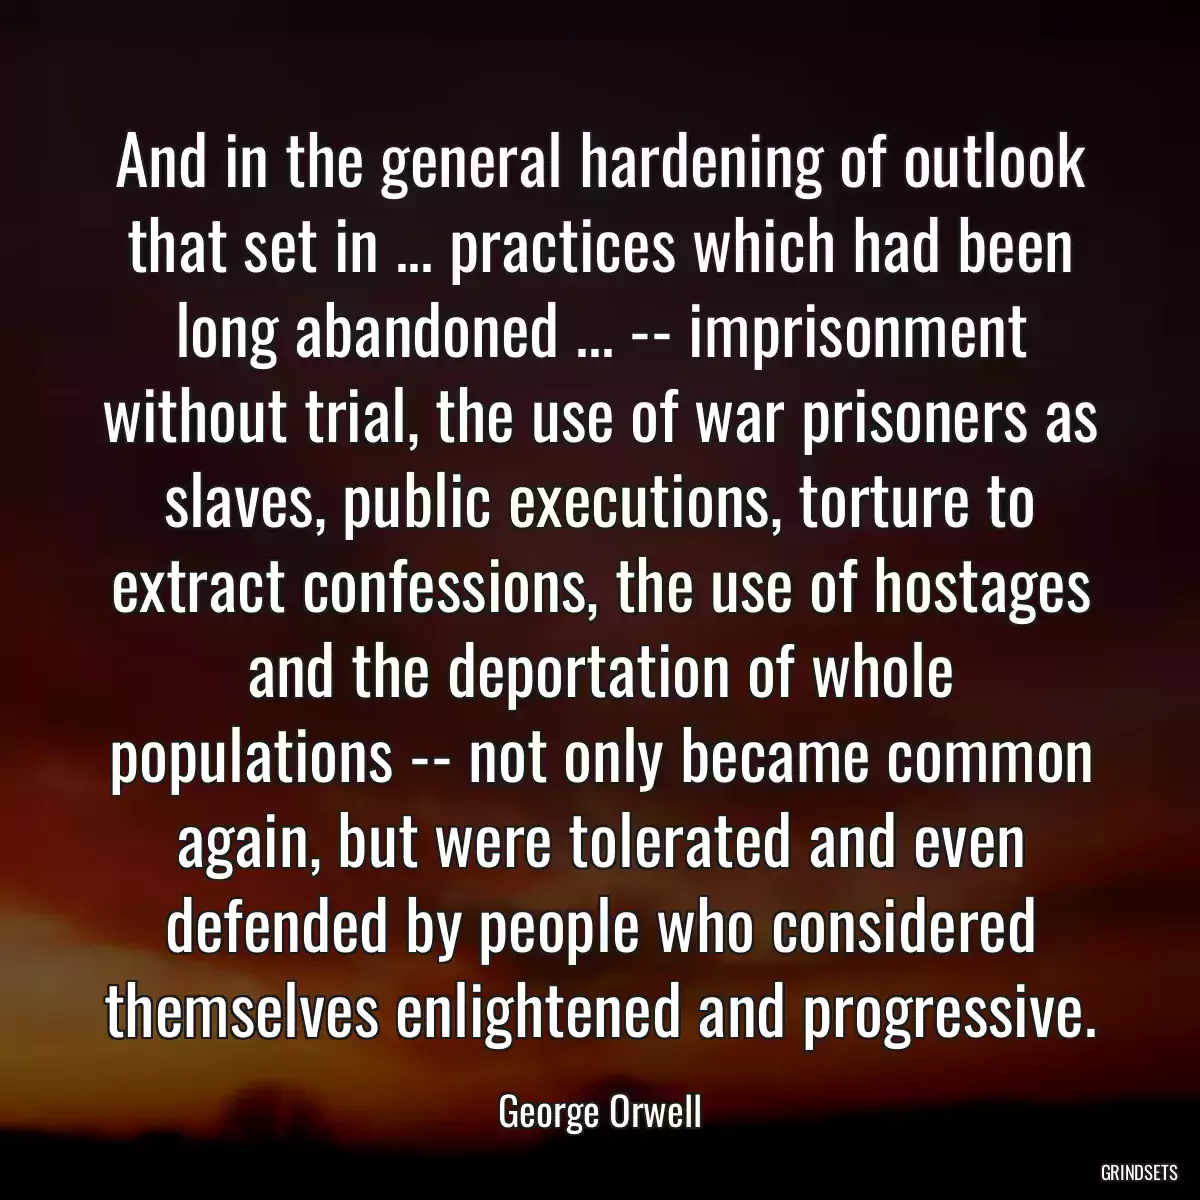 And in the general hardening of outlook that set in ... practices which had been long abandoned ... -- imprisonment without trial, the use of war prisoners as slaves, public executions, torture to extract confessions, the use of hostages and the deportation of whole populations -- not only became common again, but were tolerated and even defended by people who considered themselves enlightened and progressive.